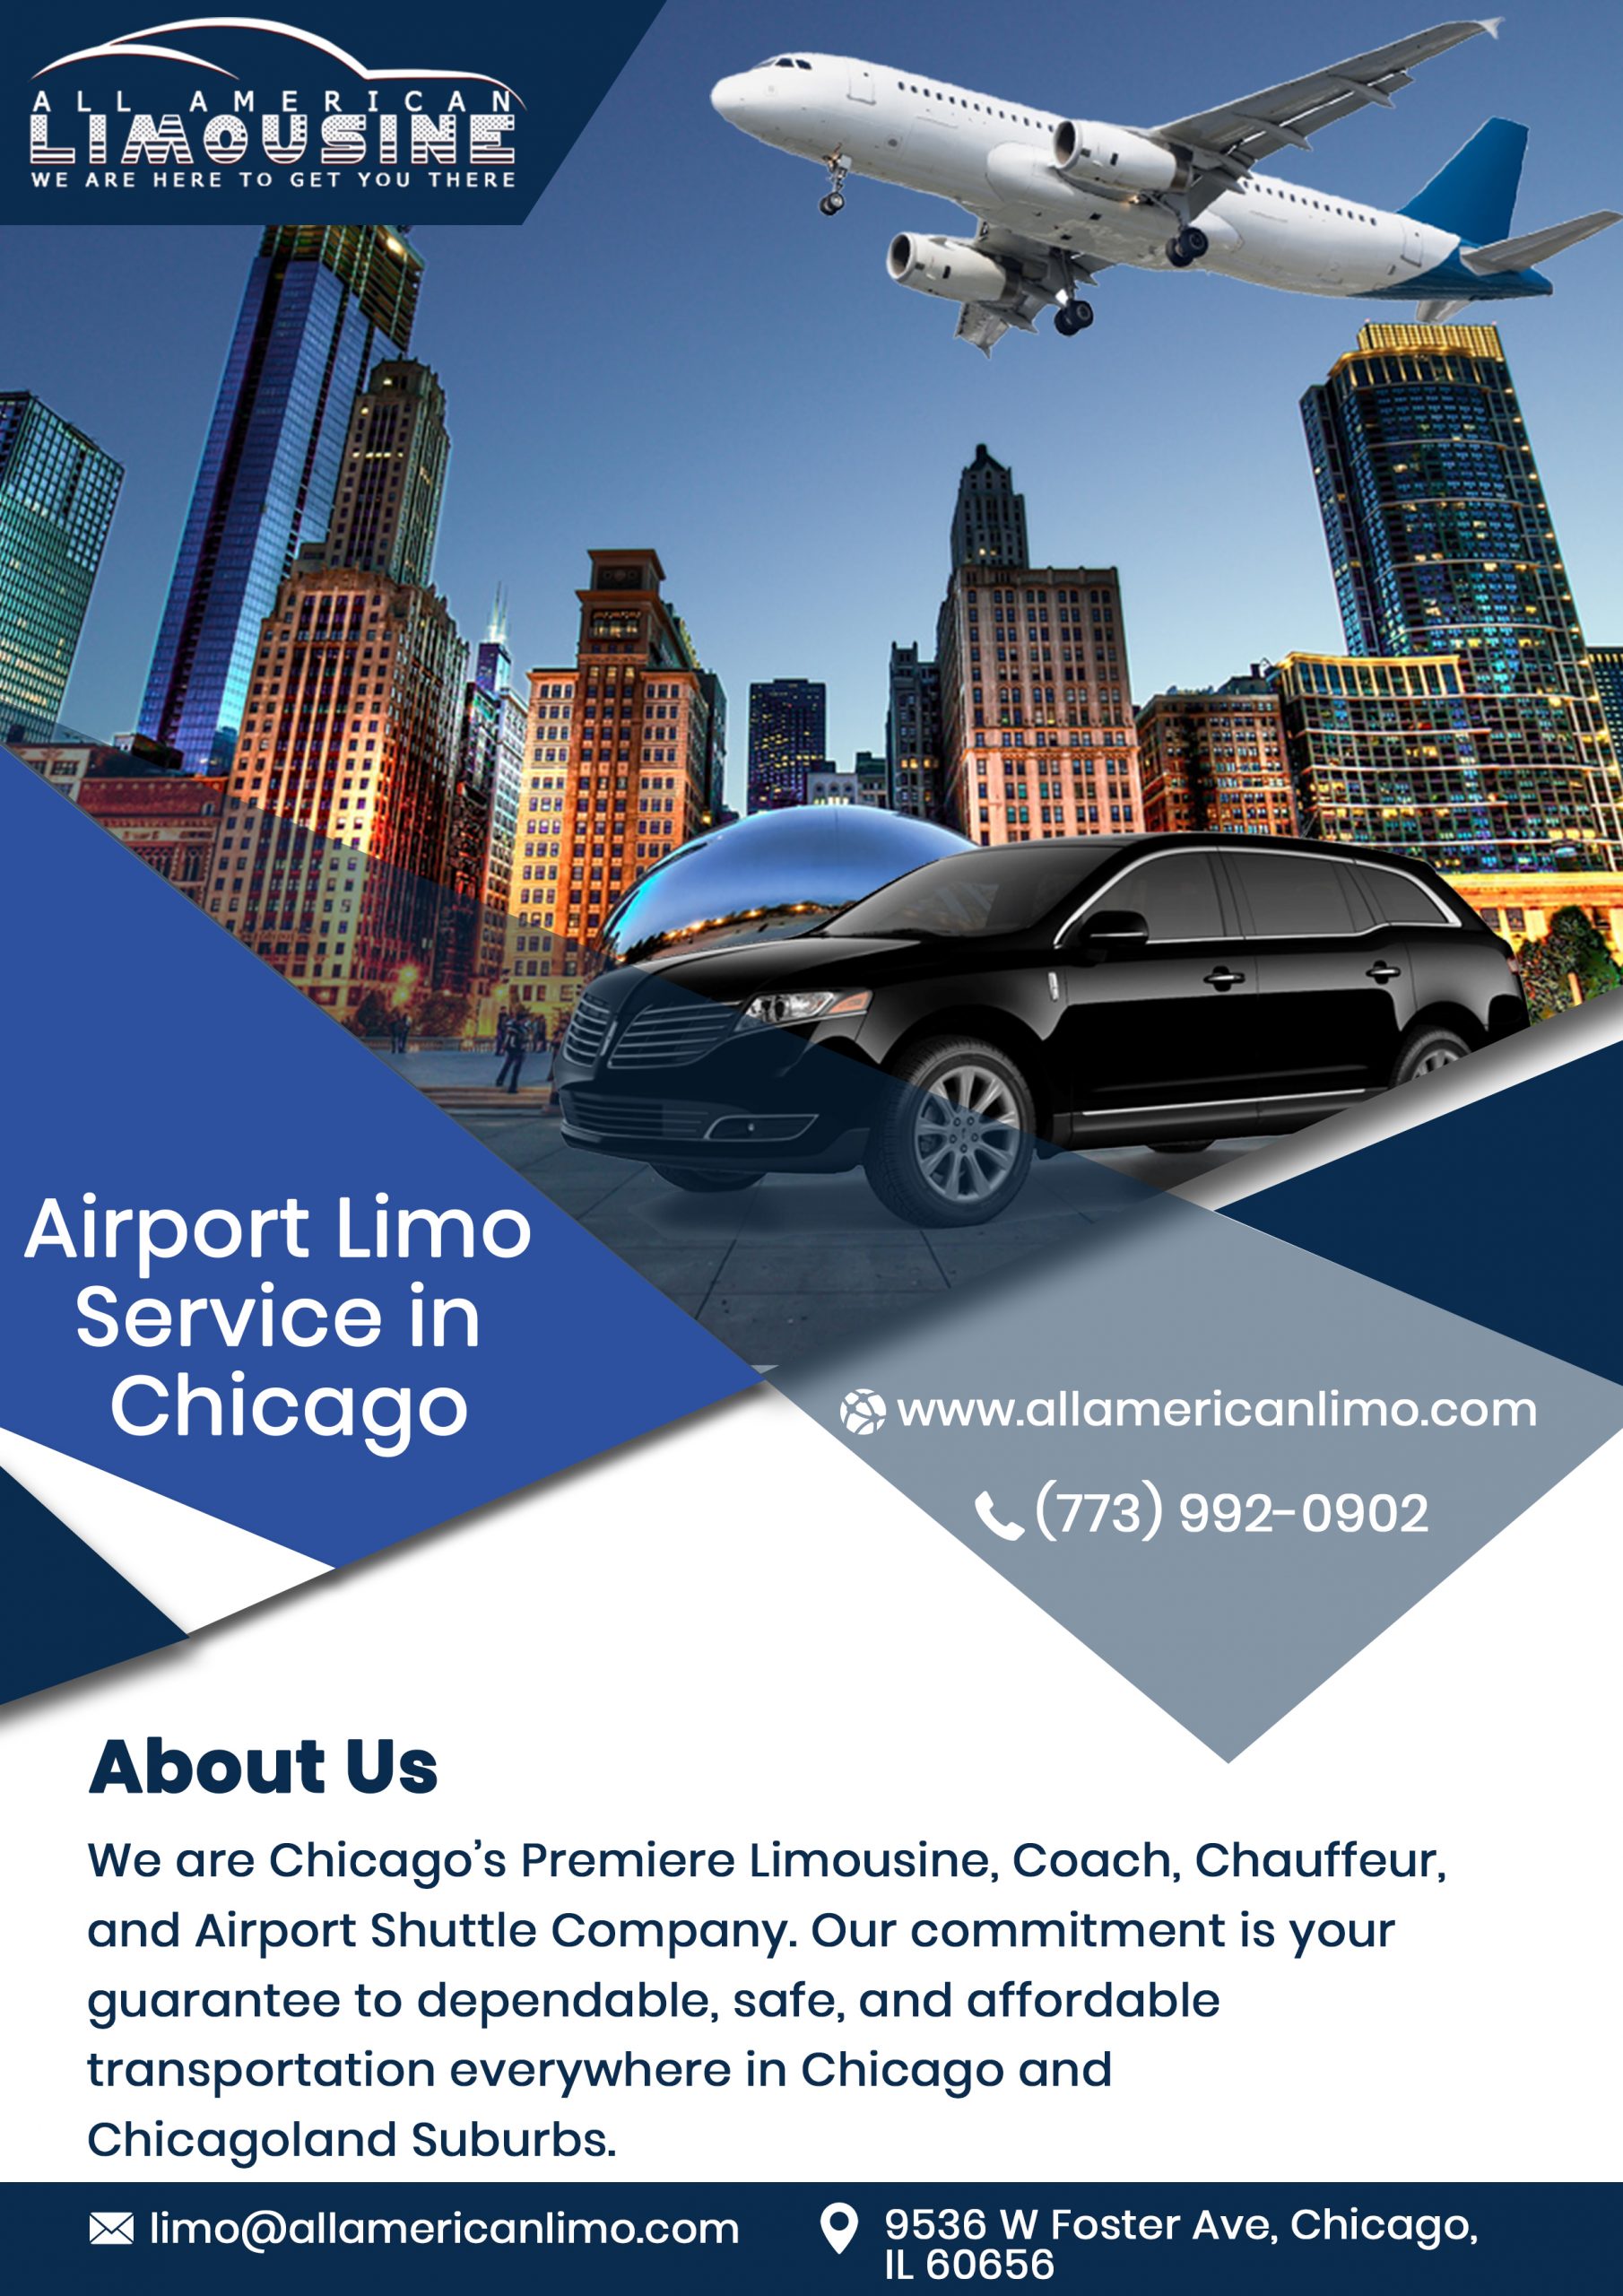 Chicago Car Service Near Me 60614, Party Bus 60614, Mercedes Sprinter Limo to 60614, Chicago Limo 60614, Limo Service 60614 to Airport, Hire, Rent, Get, Find, Car Service 60614 to Airport, Transportation Service 60614 to O'Hare, Corporate Travel 60614, Airport Travel 60614